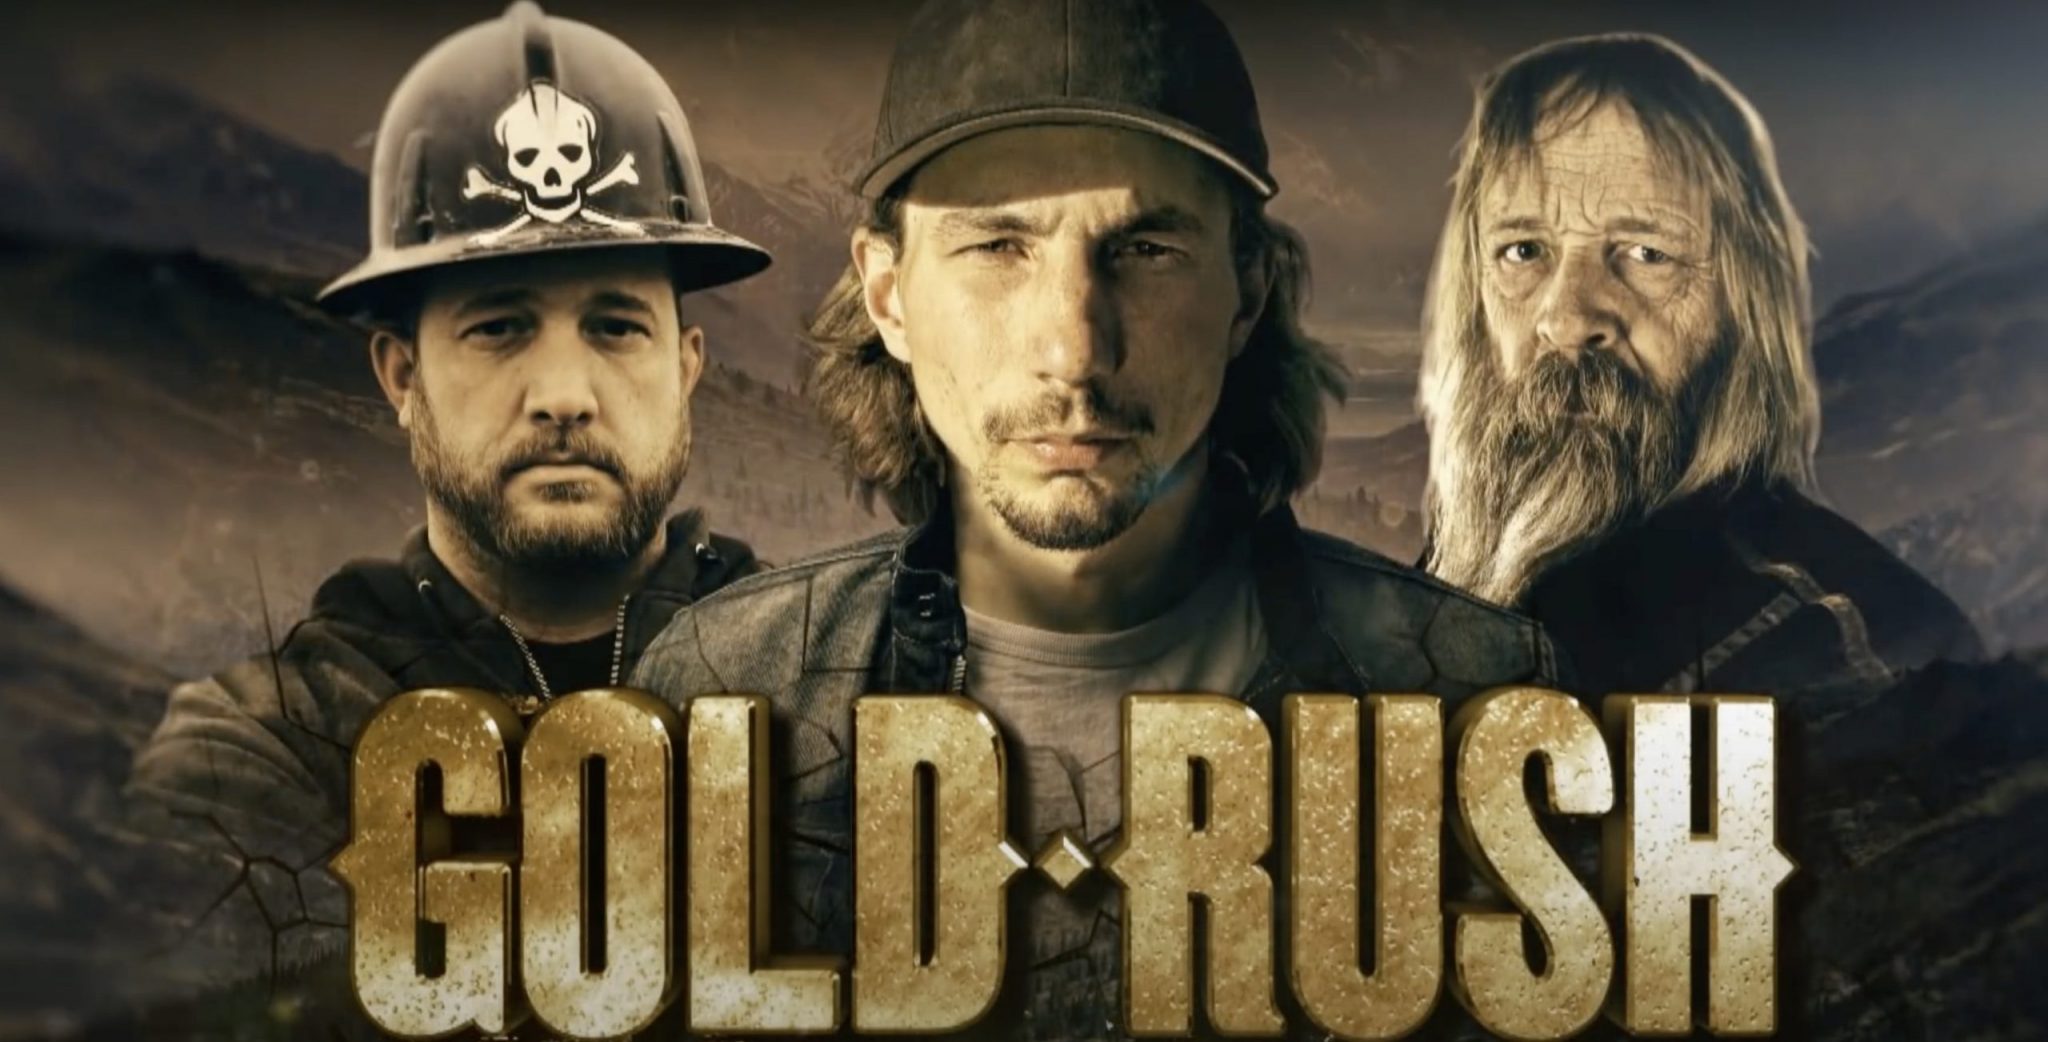 Gold Rush, Discovery, Parker Schnabel, Rick Ness, Tony Beets-https://www.youtube.com/watch?v=h_qRPXyZZ1o